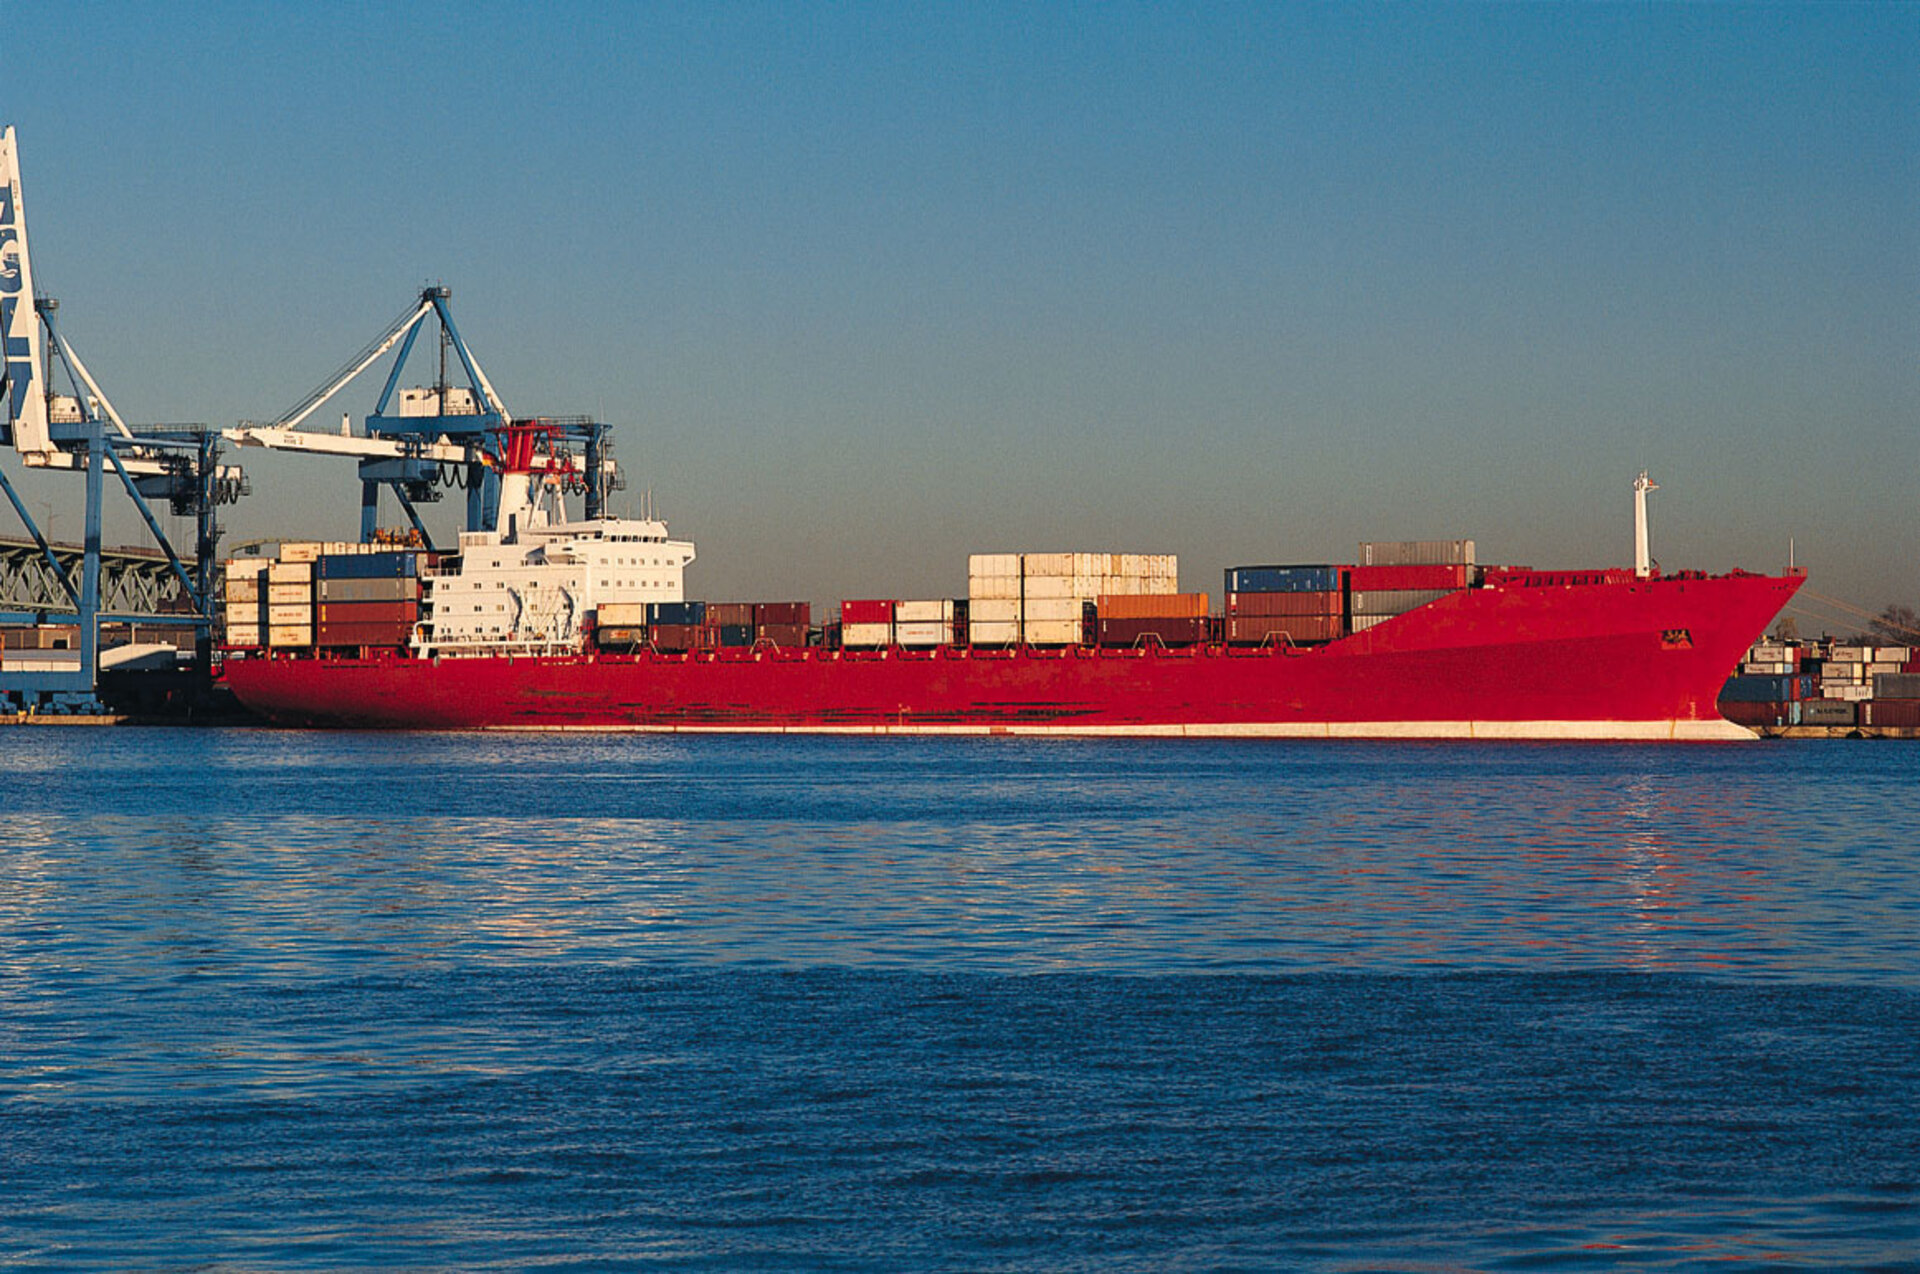 Water is common form of ballast in ships